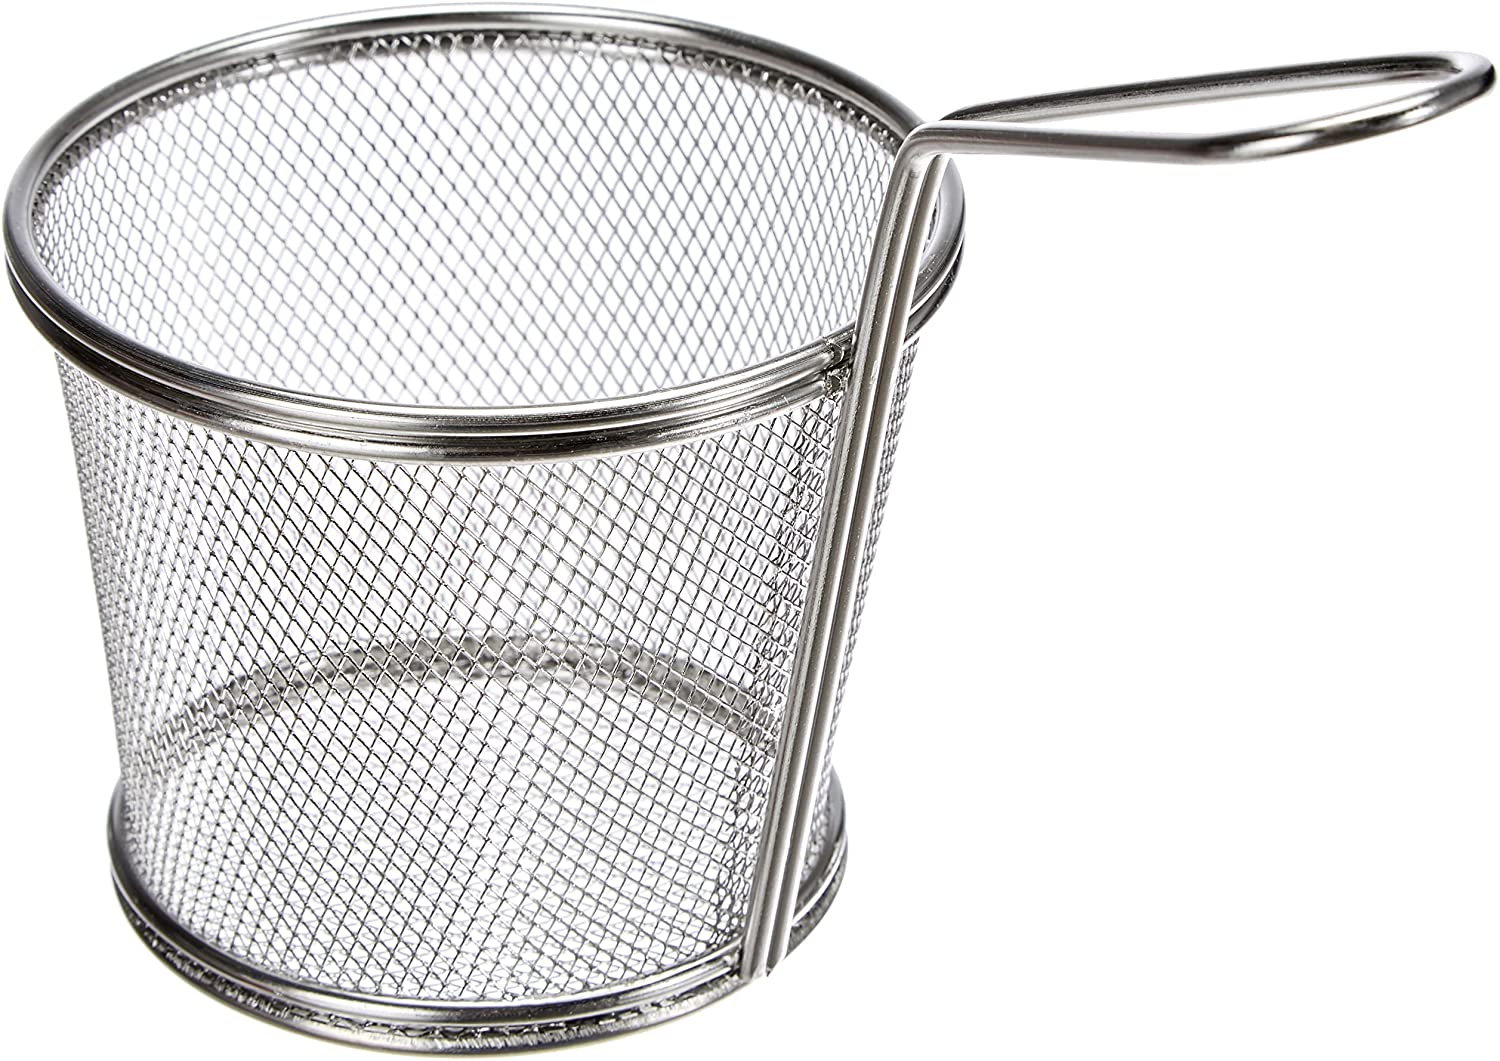 LACOR Stainless Steel Round Frying Basket, Grey, 12 cm